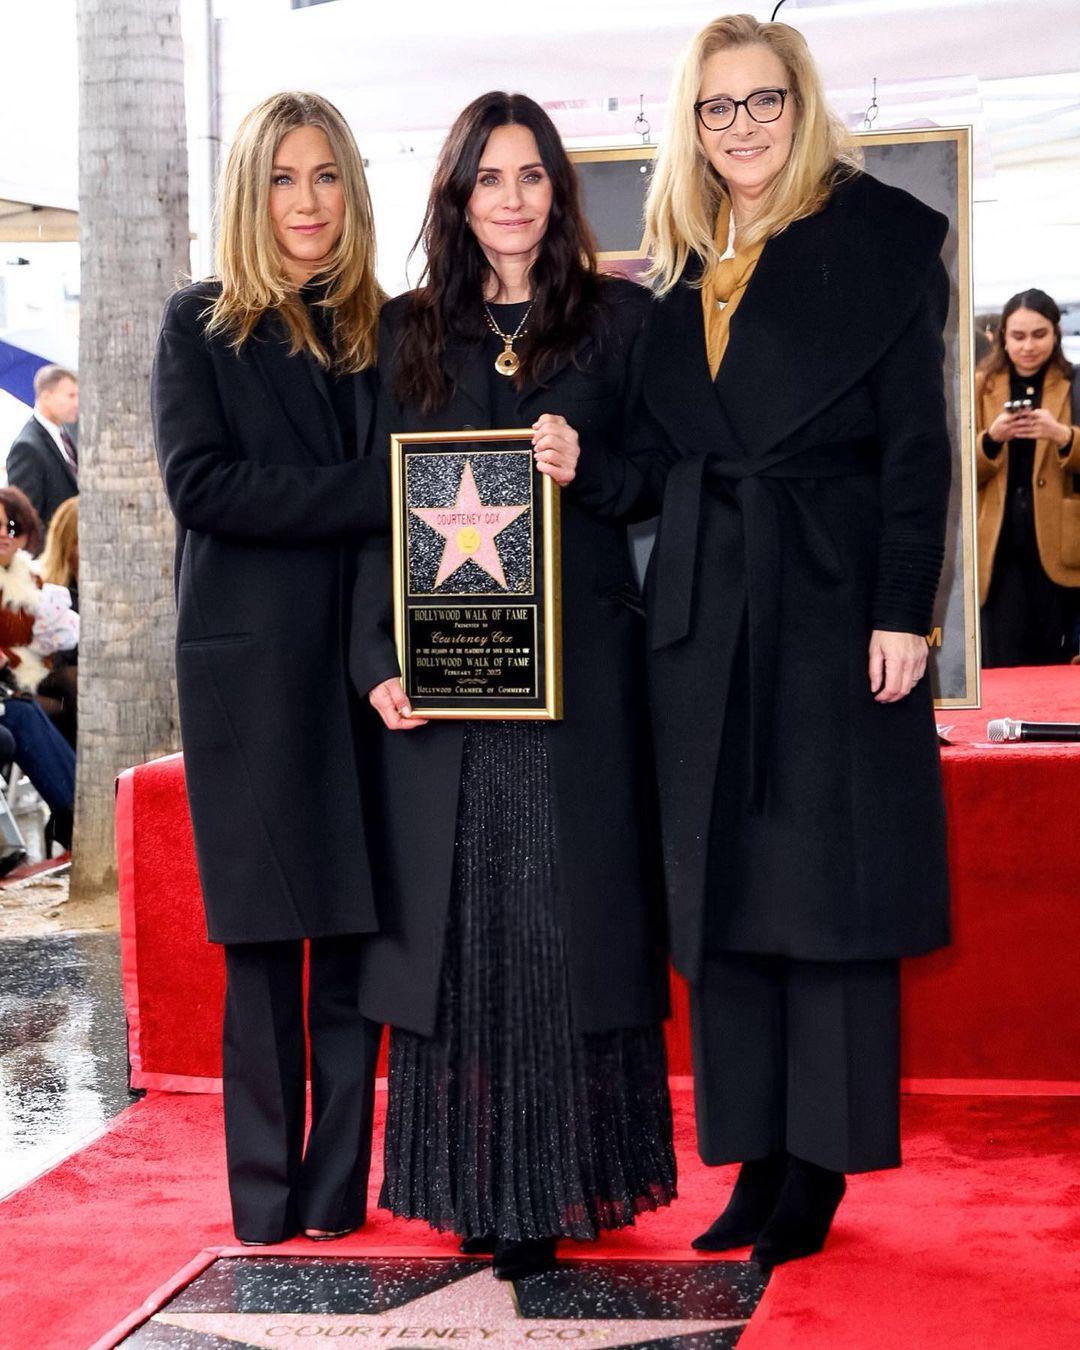 Jennifer Aniston Gushes Over BFF Courteney Cox's Hollywood Walk Of Fame Star Achievement